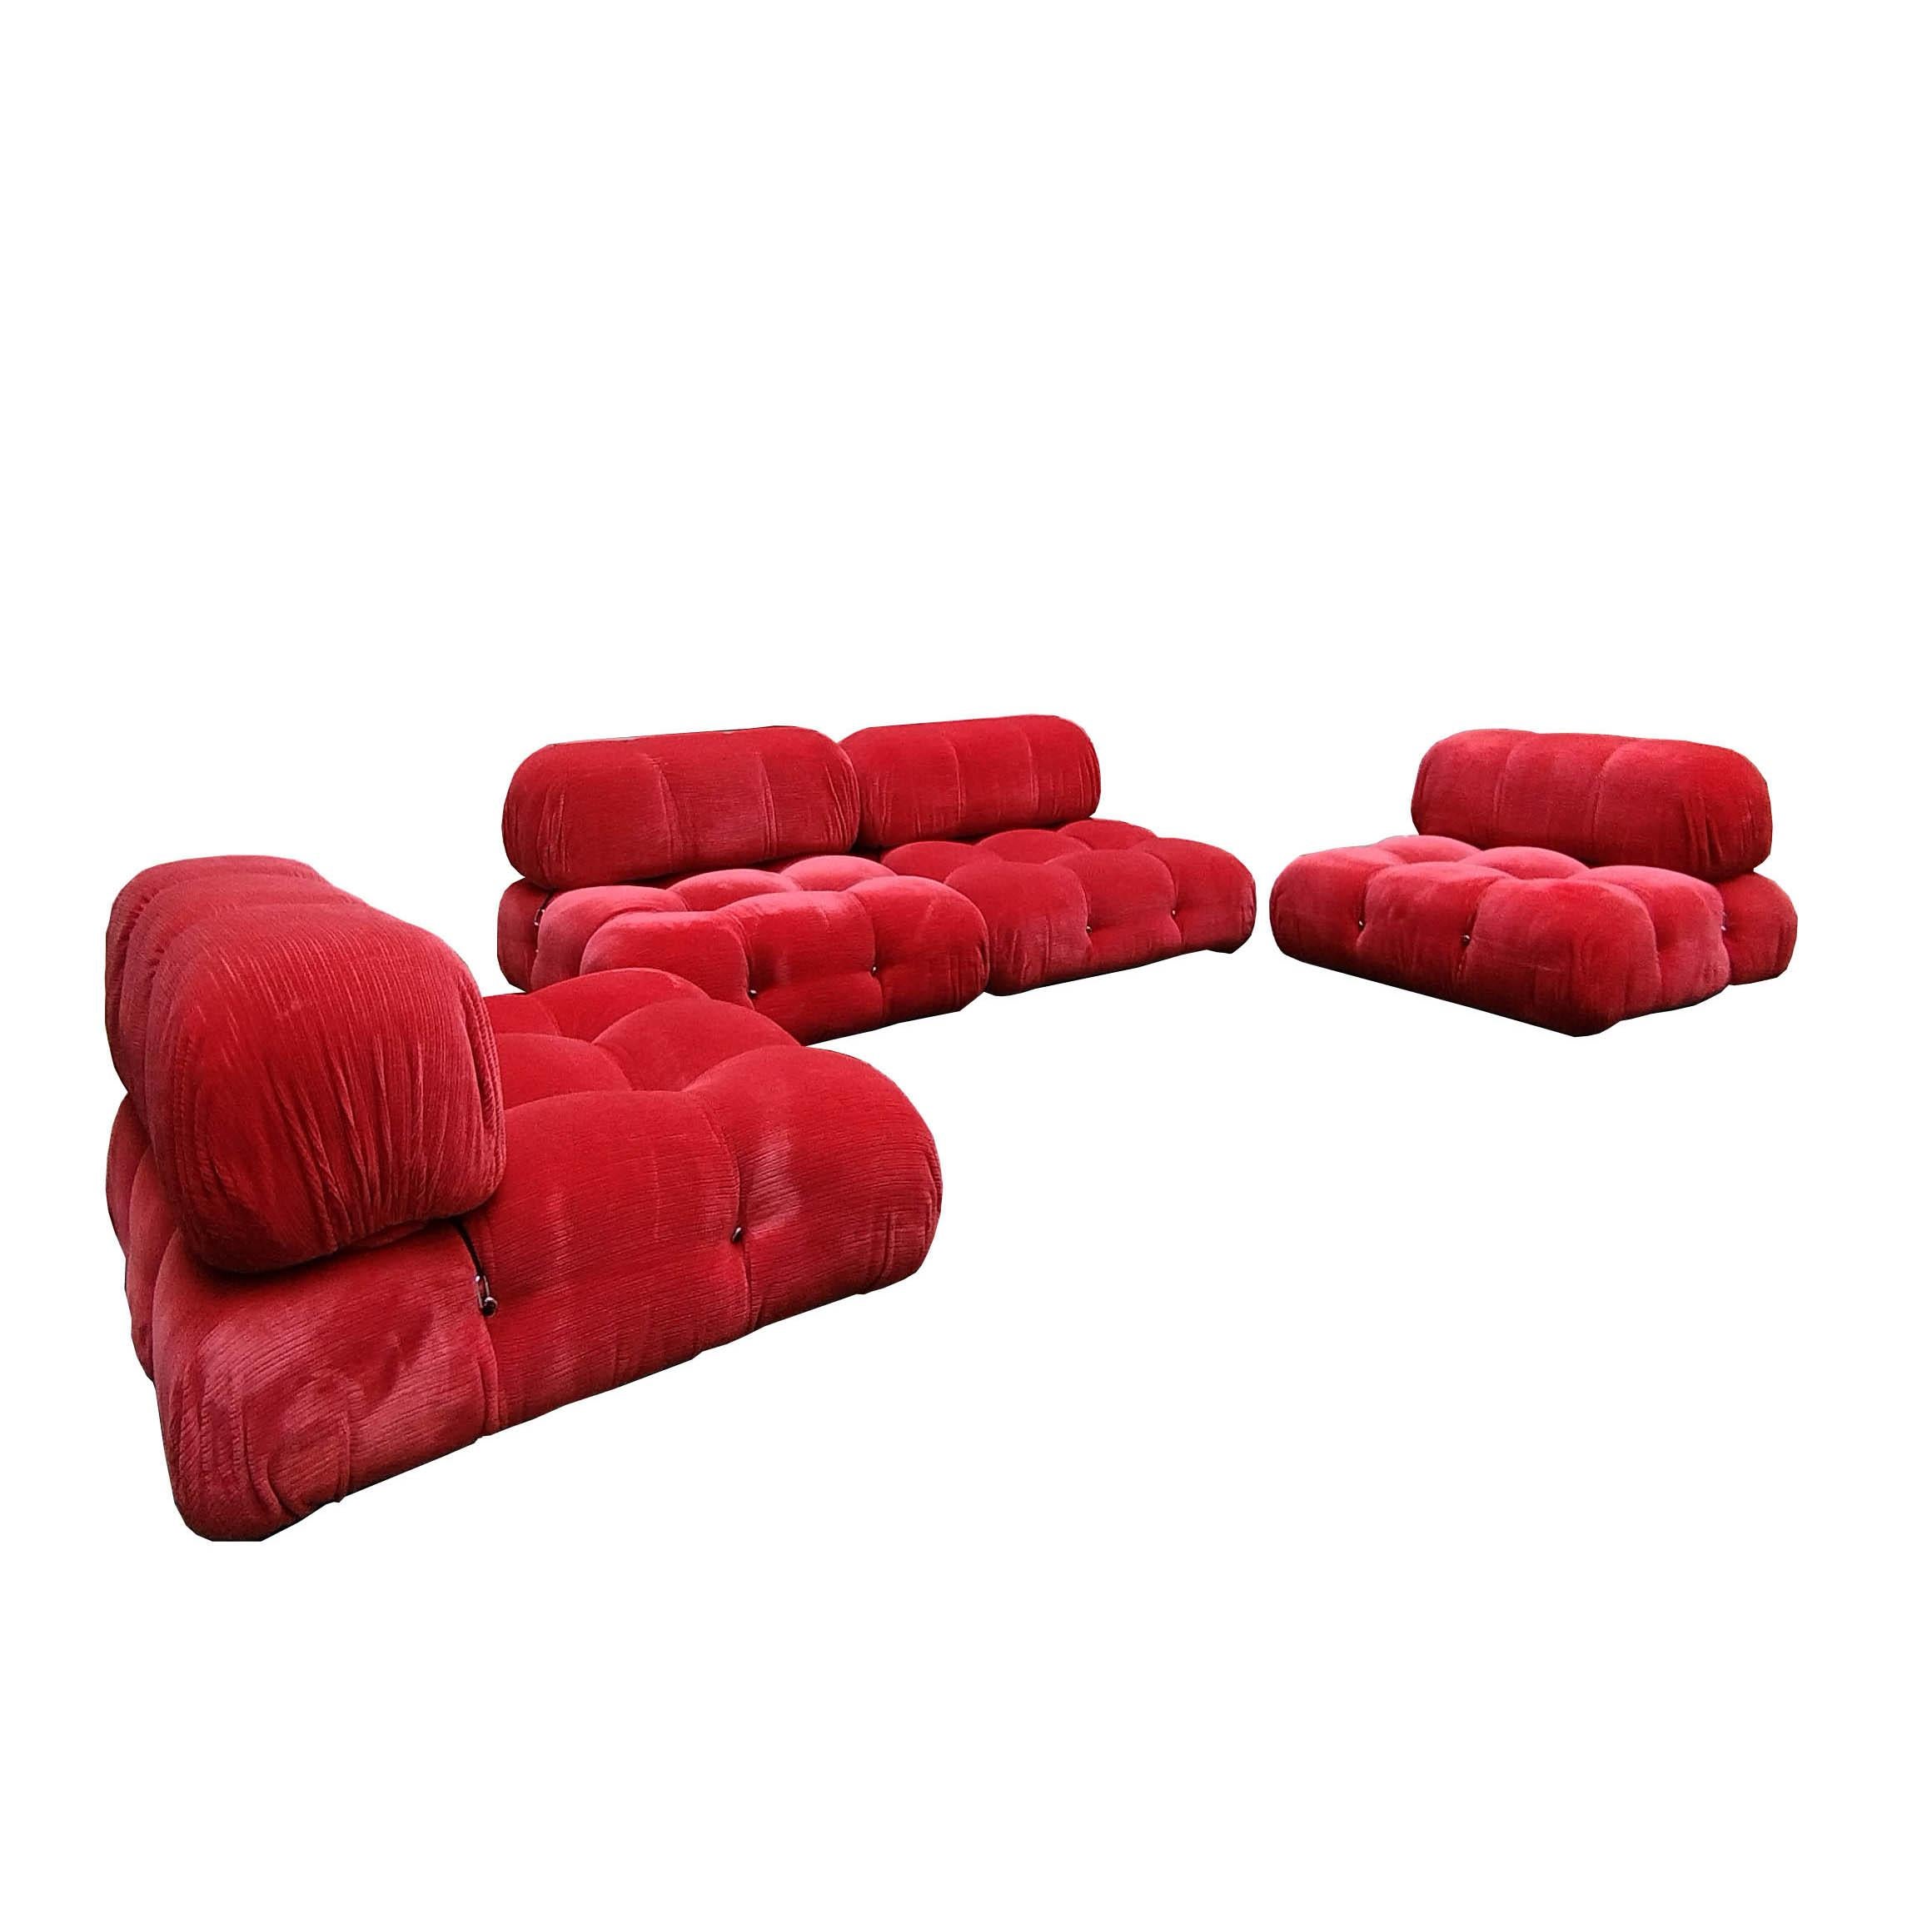 Mario Bellini, large modular sofa 'Cameleonda', red fabric covering, Italy, designed in 1971

The modular elements of this sofa can be used freely and separately from each other. The backrests and armrests are fitted with rings and snap hooks,